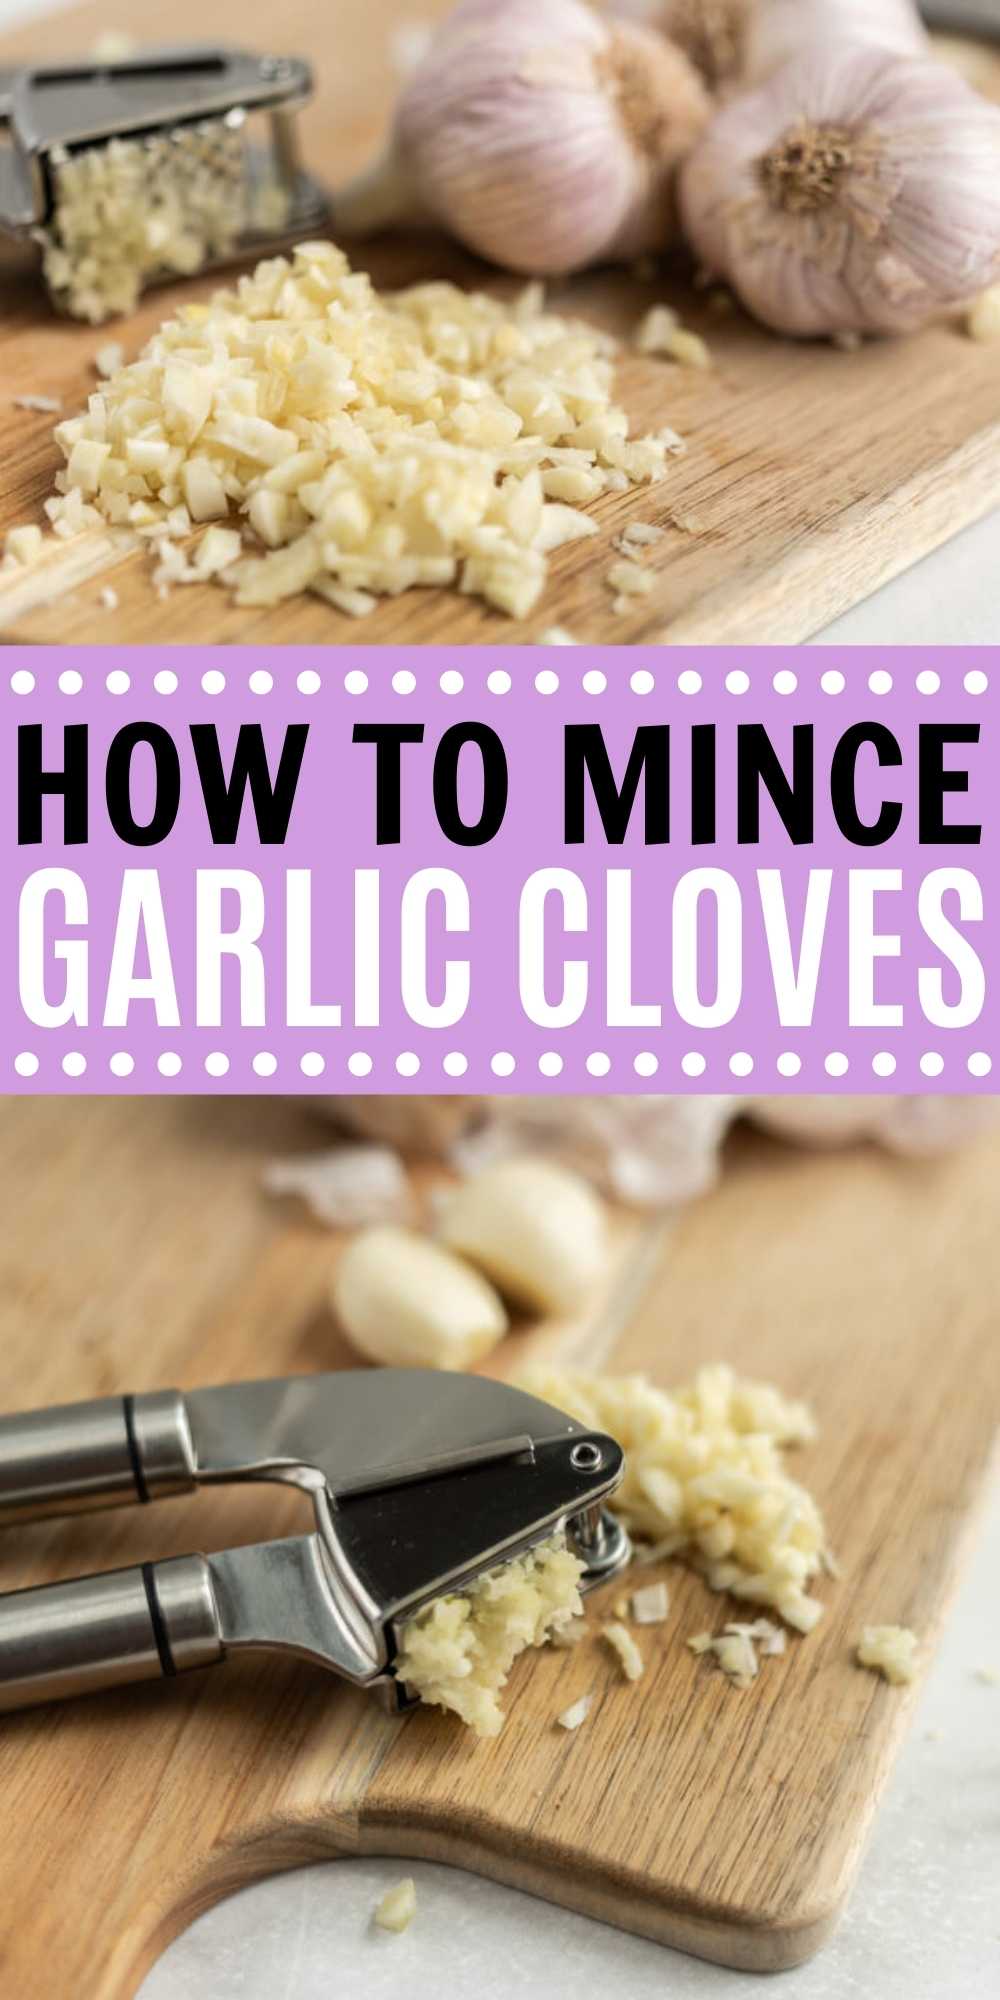 Learn how to mince garlic cloves with this easy step-by-step guide. Learn how to peel and mince garlic to easily use in all your favorite recipes.  Check out how easy it is to mince garlic with a garlic press.  #eatingonadime #mincedgarlic #howto #garlic 
